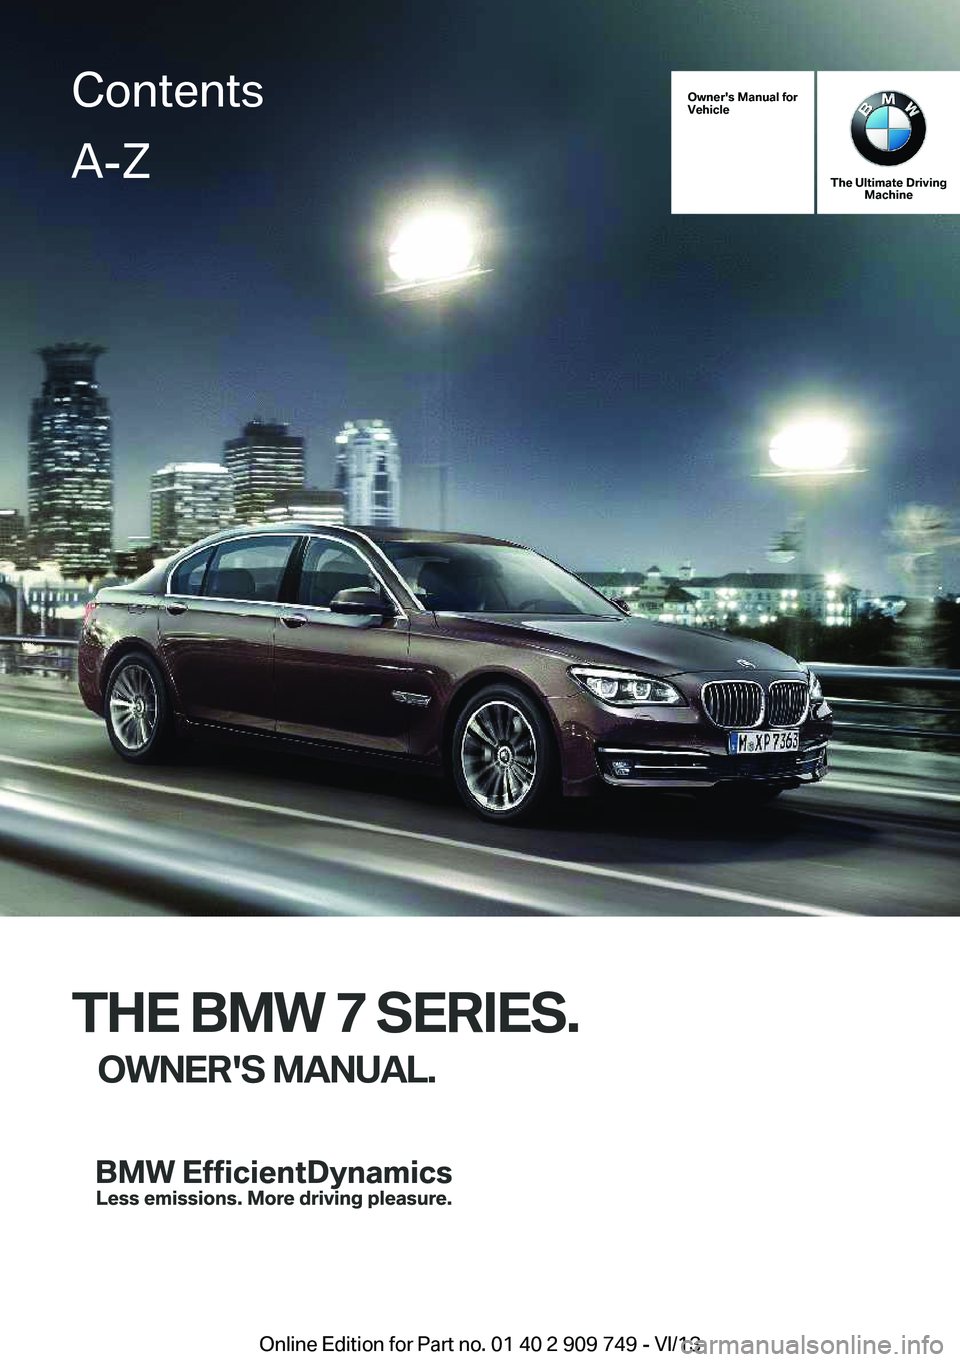 BMW 750LI 2014  Owners Manual Owner's Manual for
Vehicle
The Ultimate Driving Machine
THE BMW 7 SERIES.
OWNER'S MANUAL.
ContentsA-Z
Online Edition for Part no. 01 40 2 909 749 - VI/13   